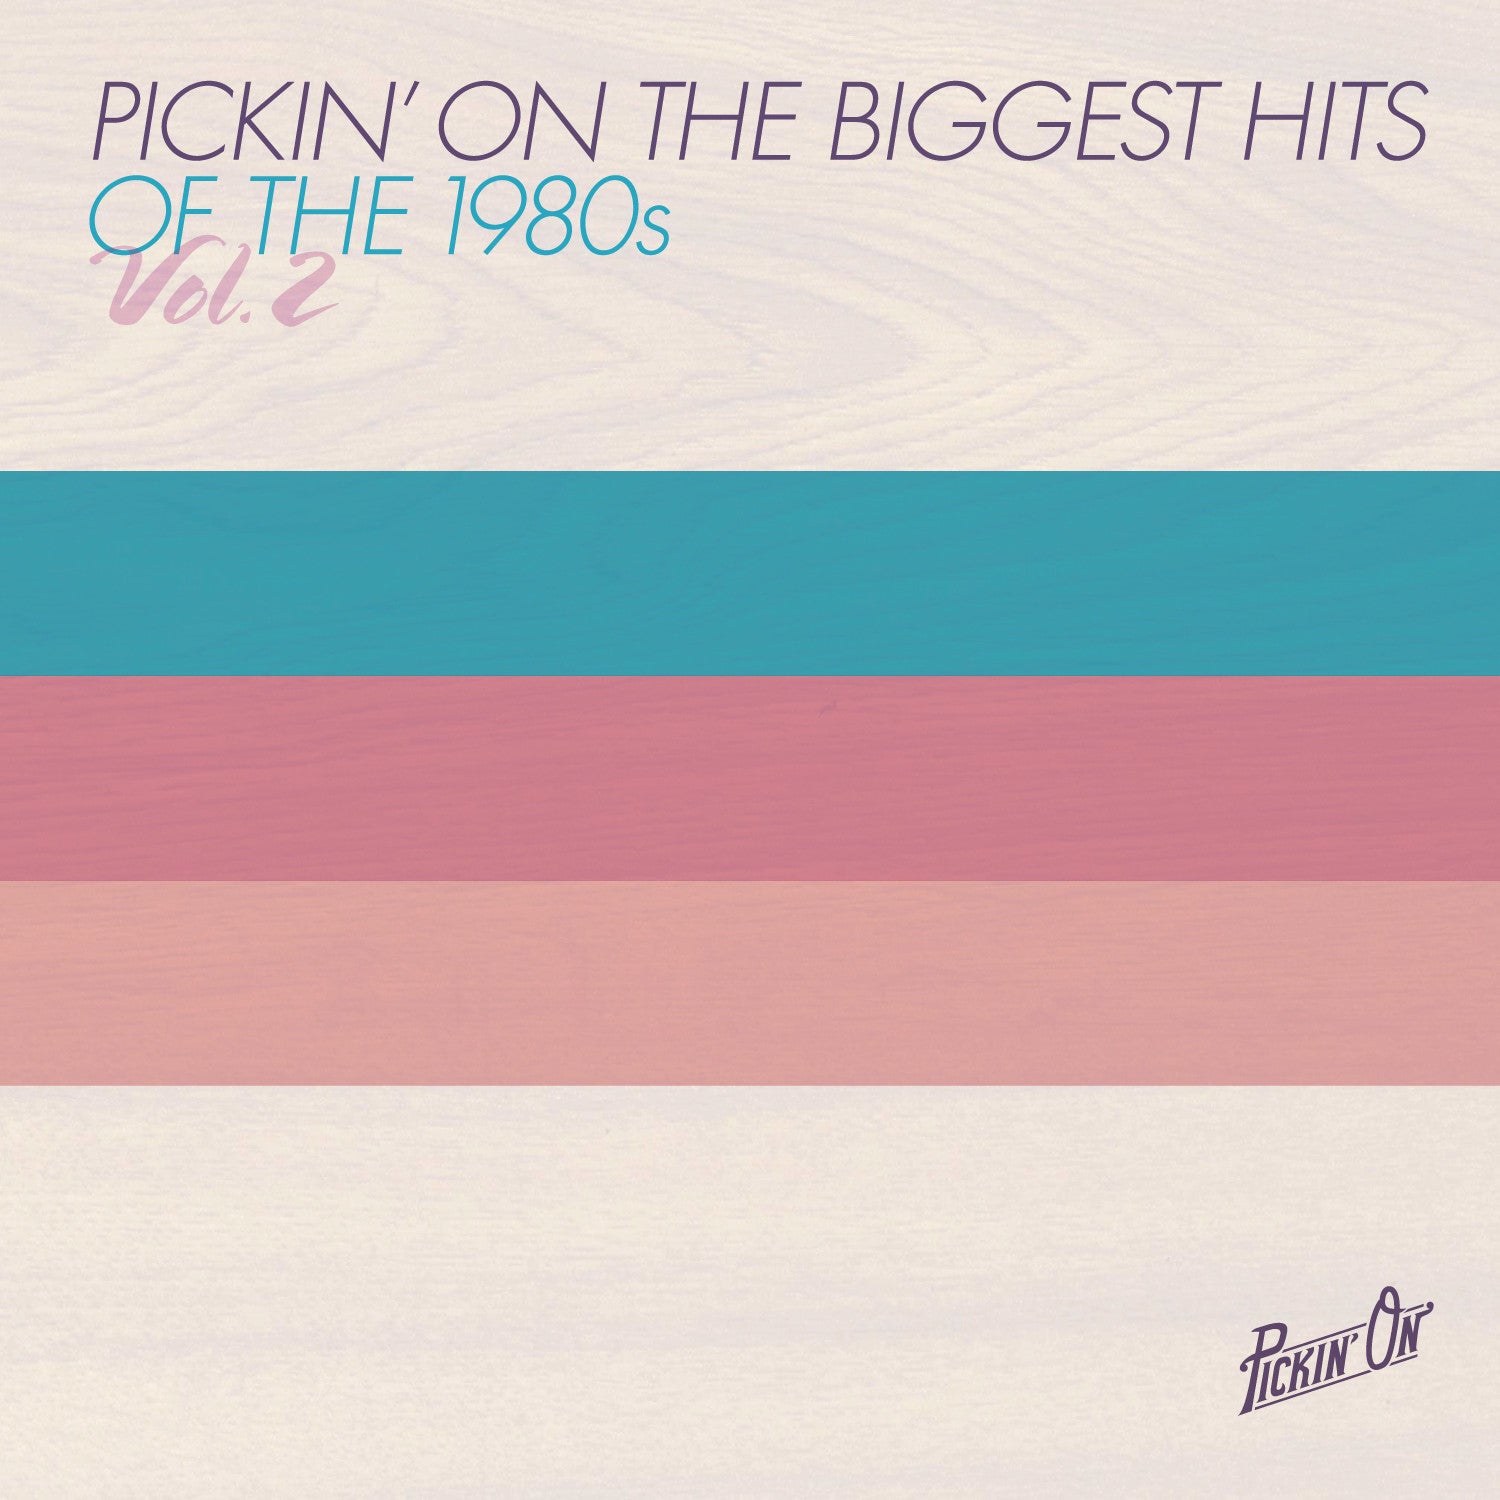 Pickin’ On The Biggest Hits of the 1980s Vol. 2